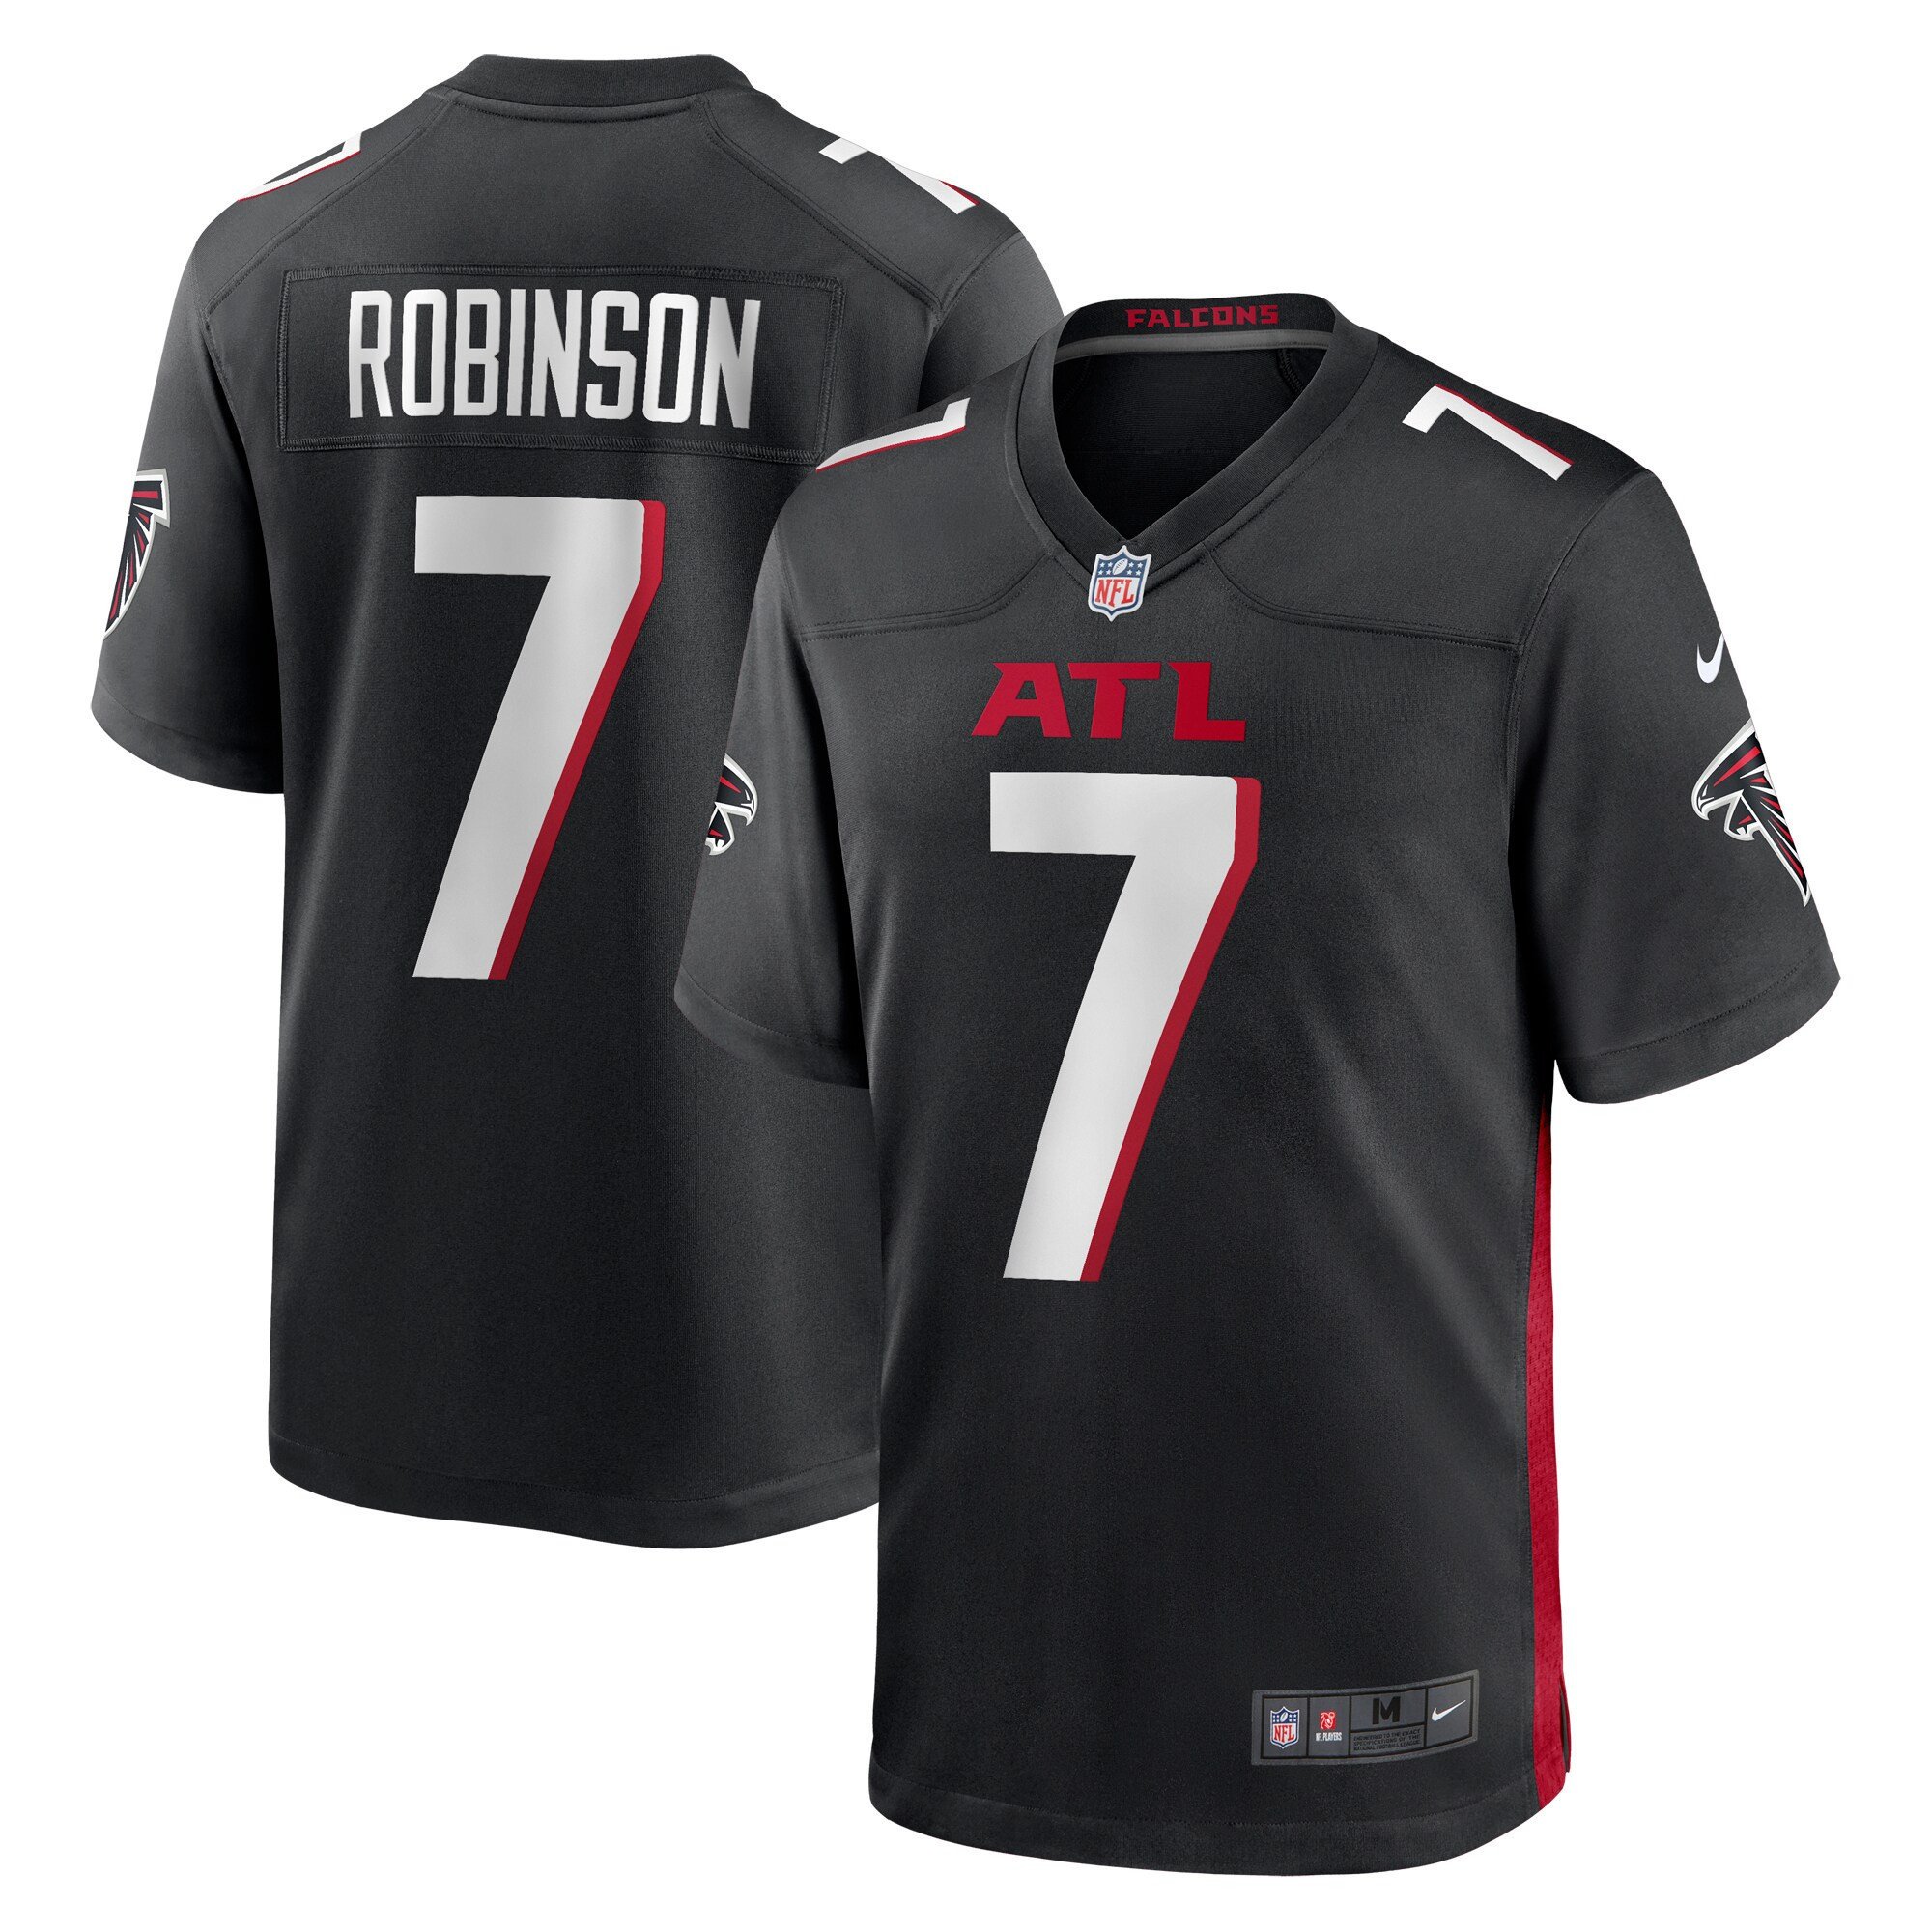 Atlanta Falcons Black Game Jersey - All Stitched